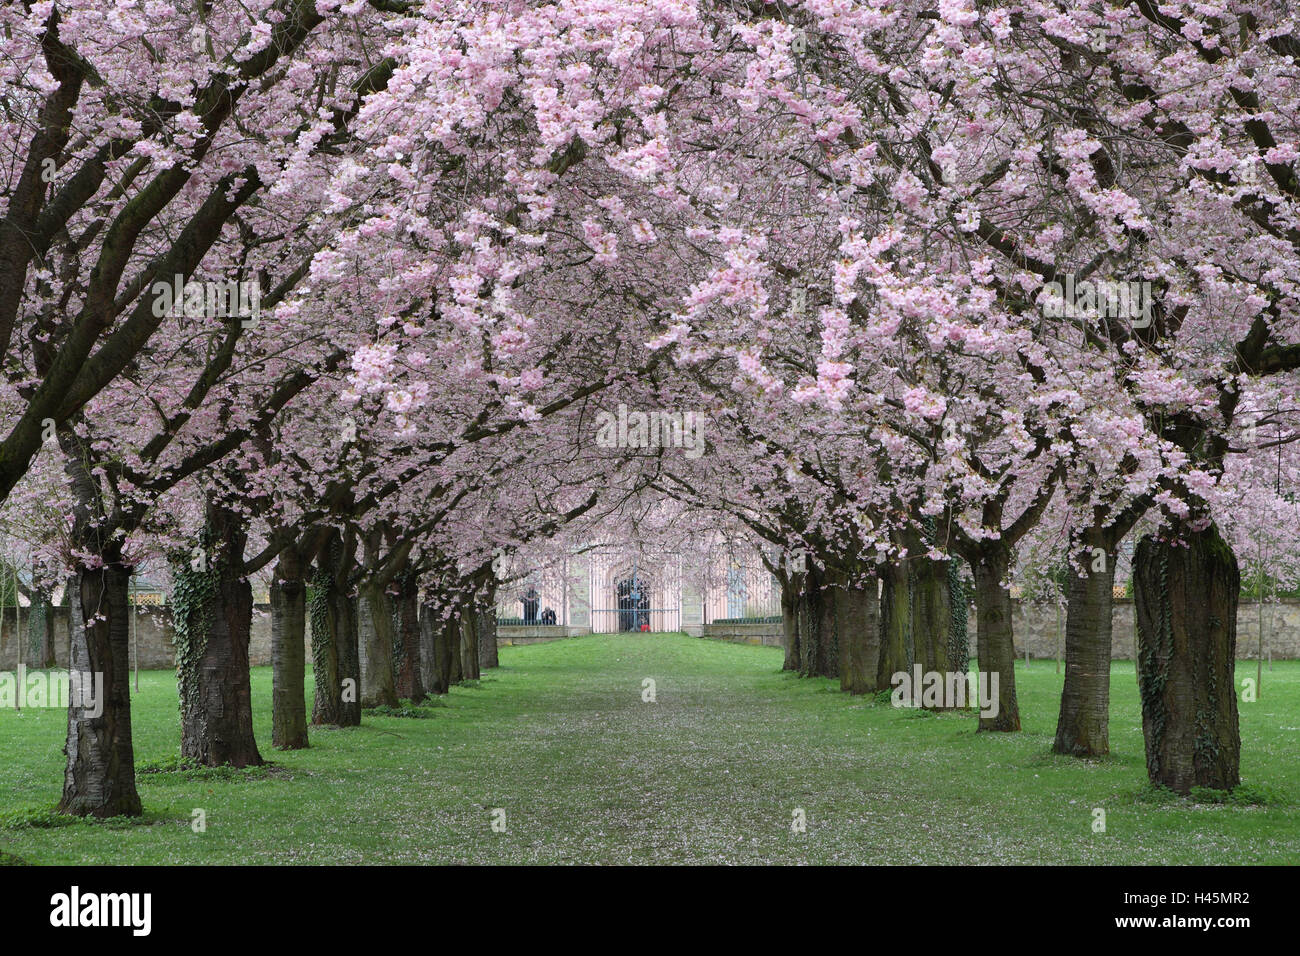 flowerage, place of interest, season, spring, castle grounds, garden, castle, avenue, trees, cherry trees, ornamental cherry, period of bloom, pink, outside, deserted, Stock Photo